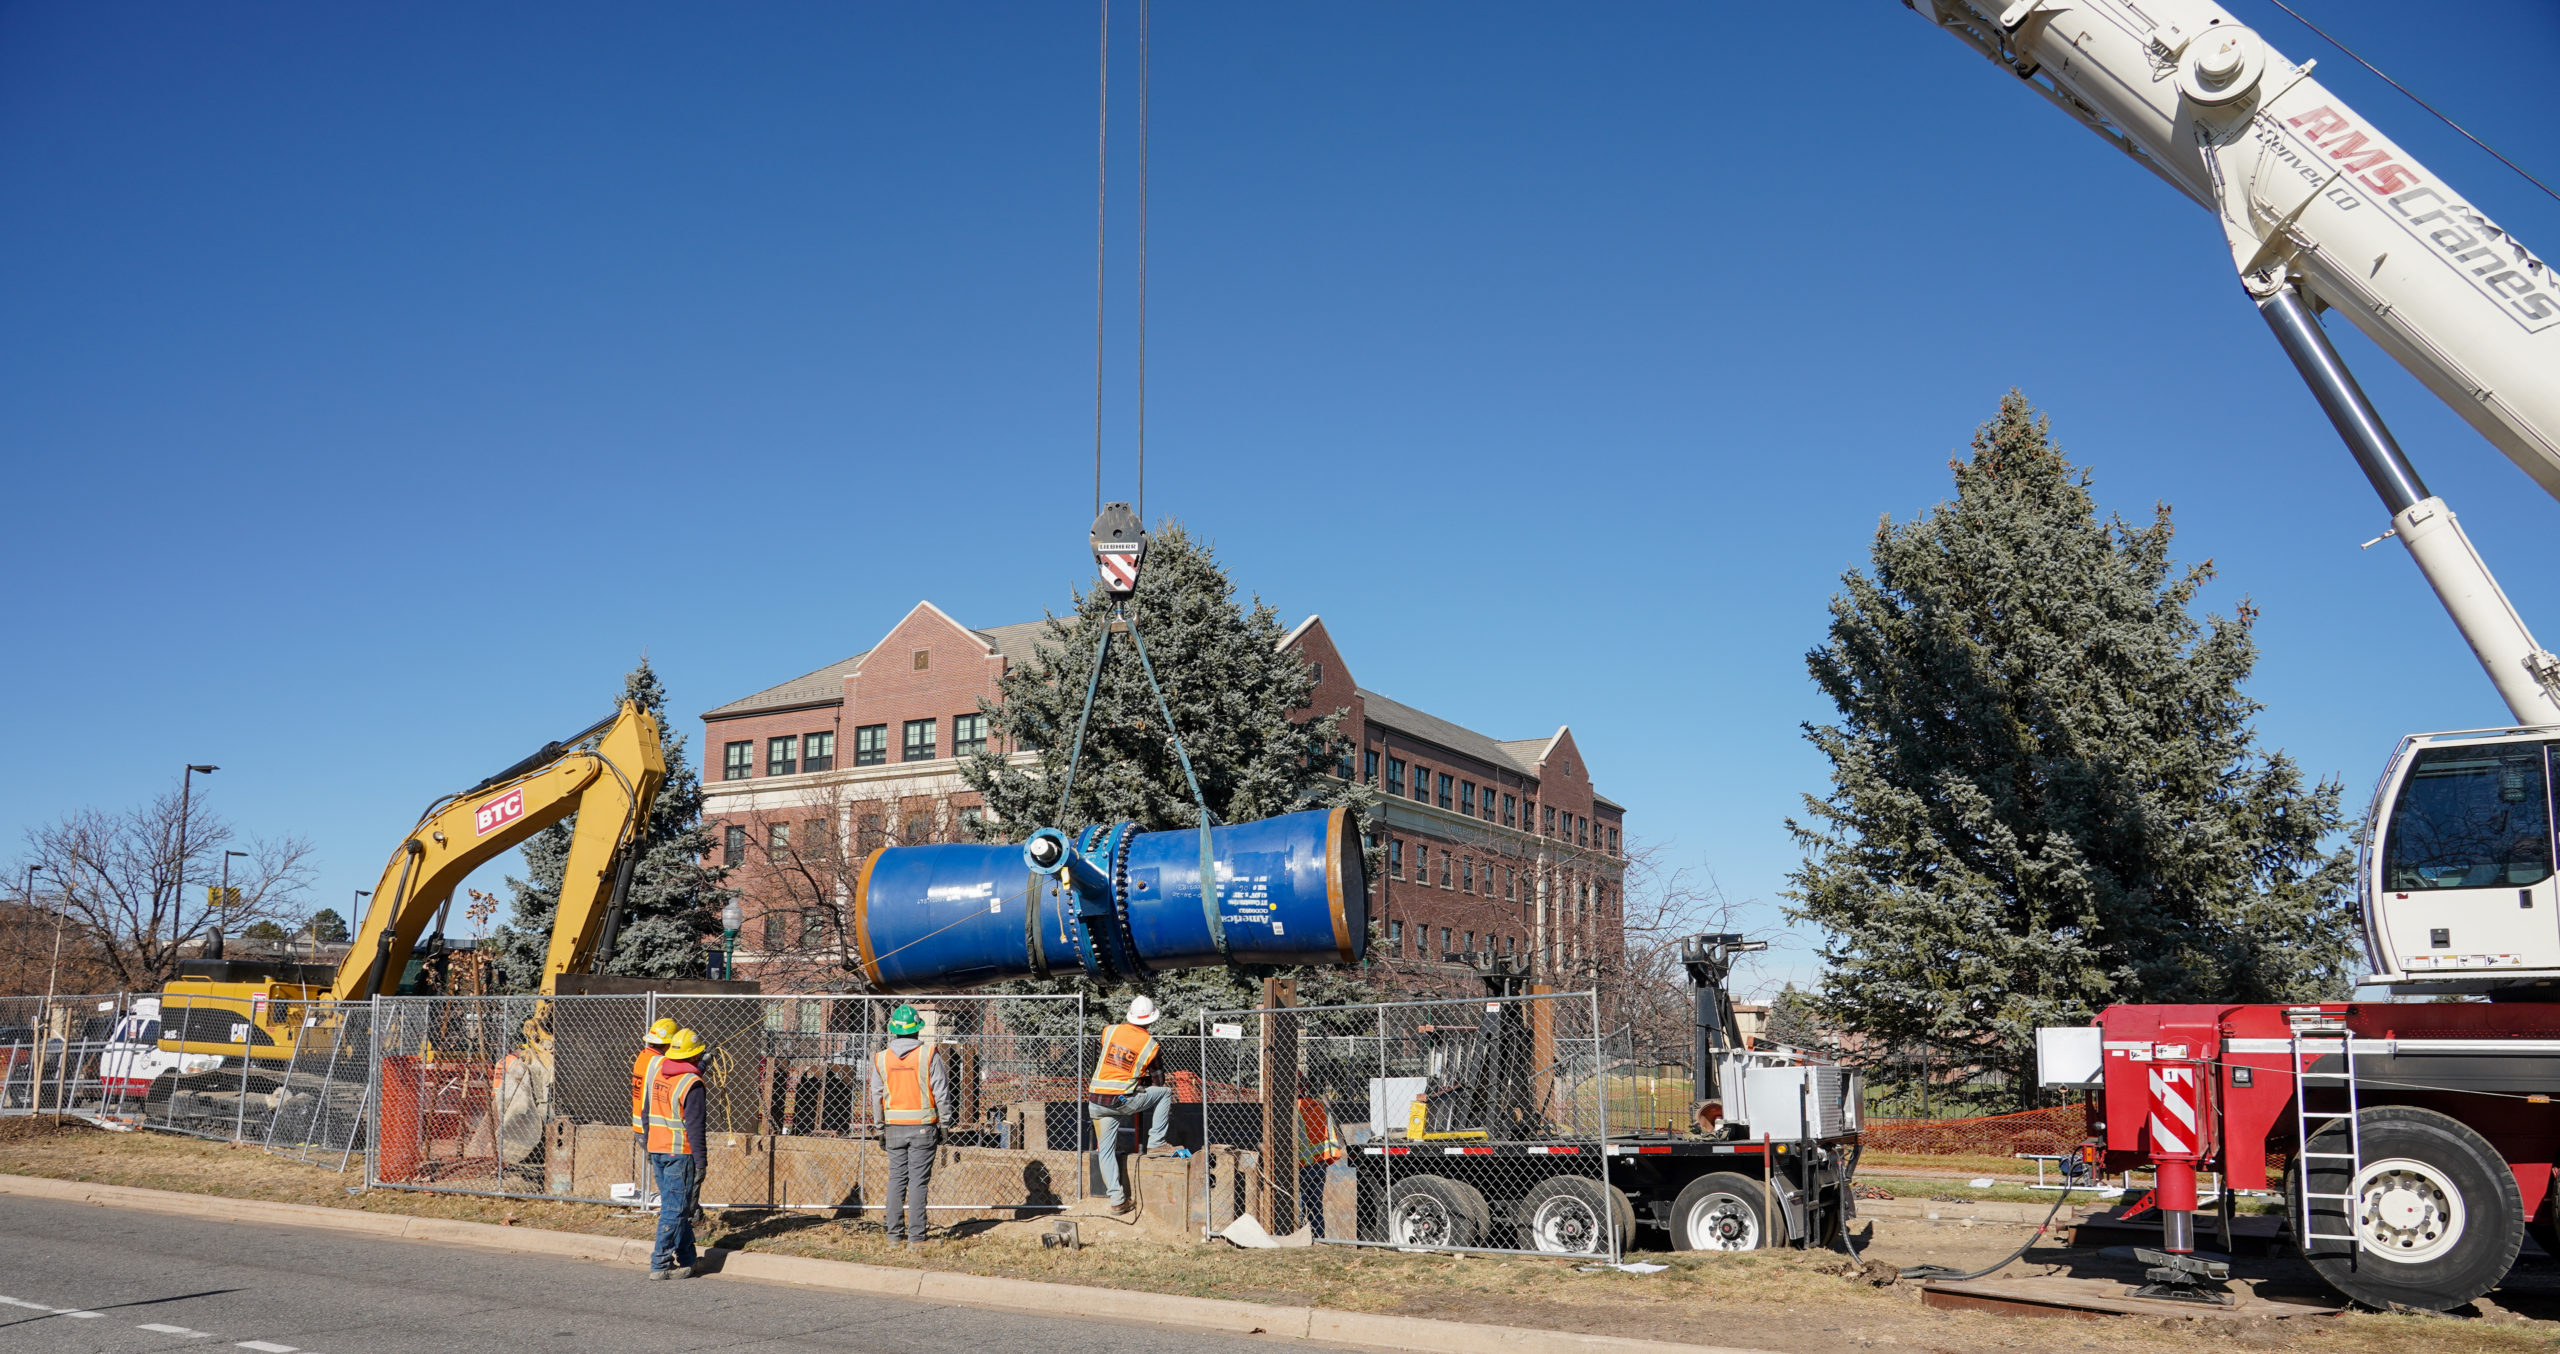 Construction workers lower a large valve into a trench at West 50th Avenue and Irving Street in front of Regis University. Photo credit: Denver Water.